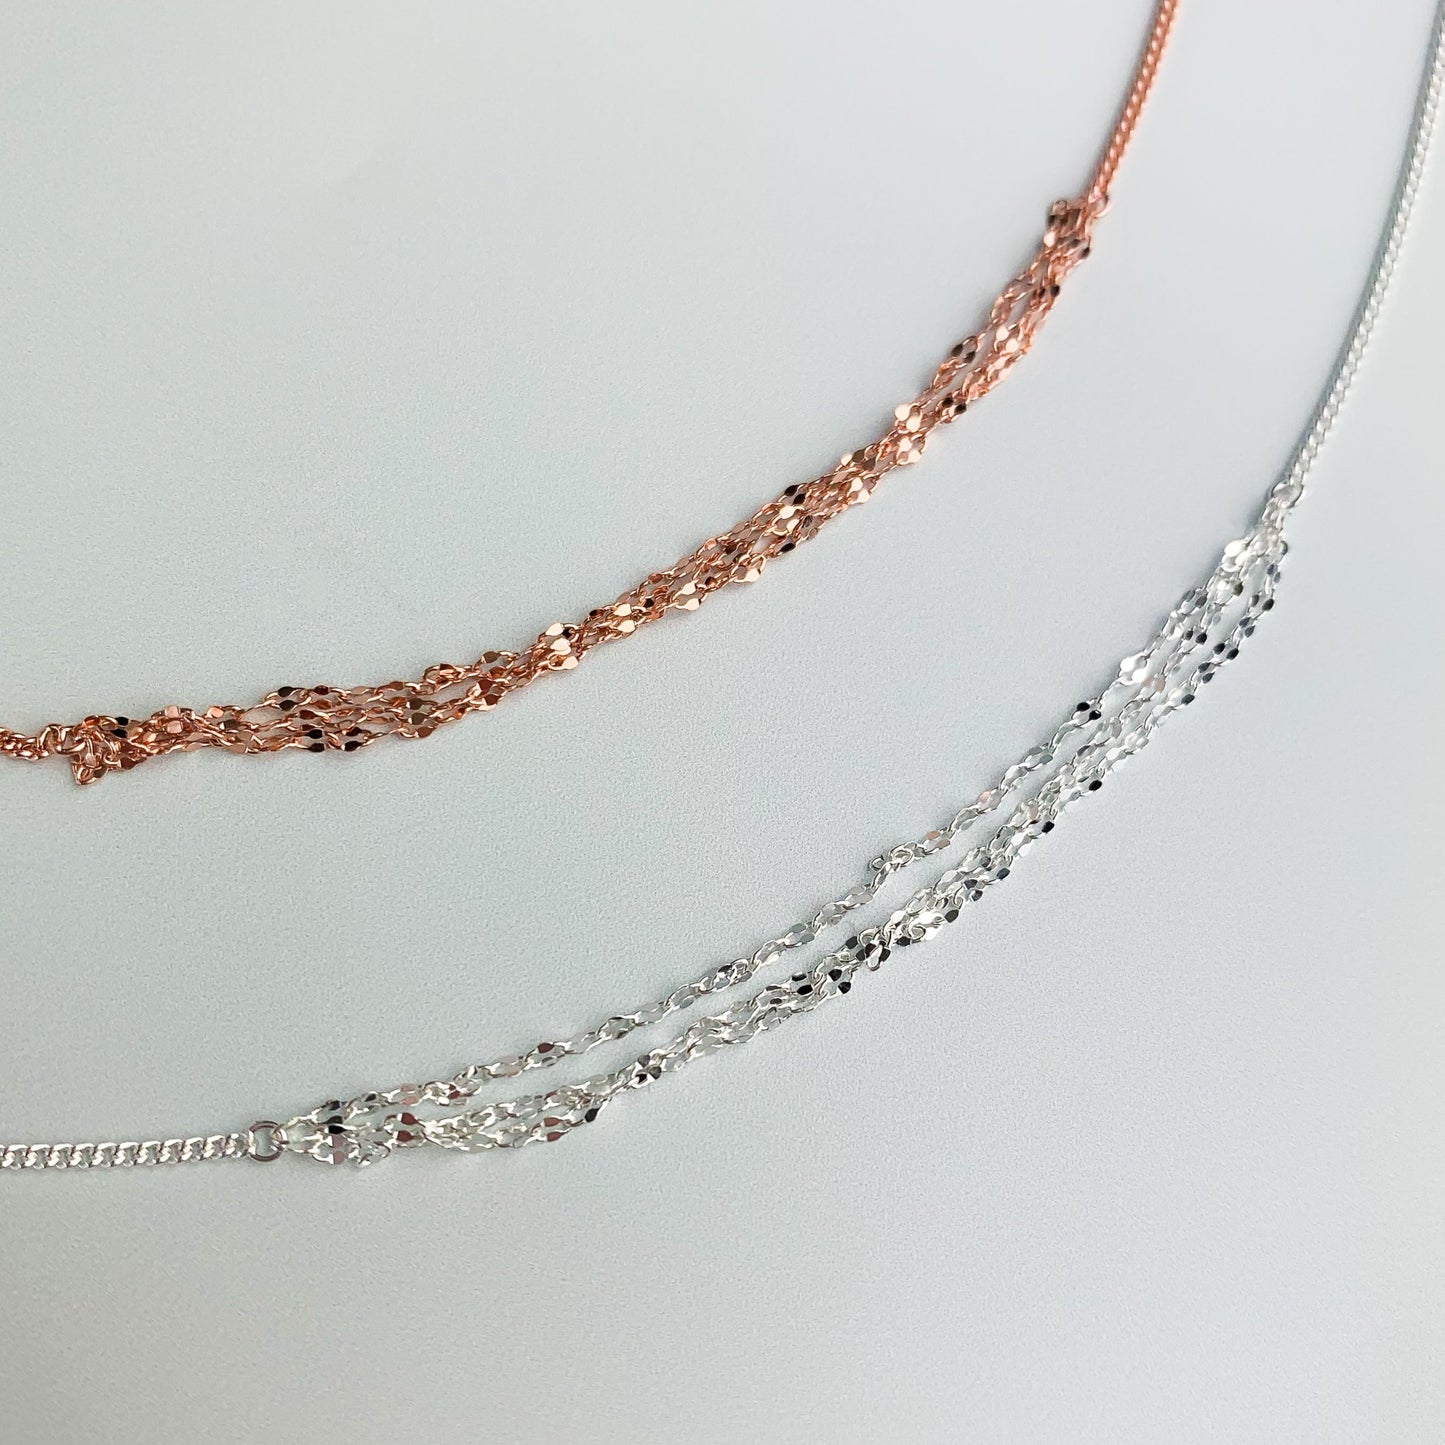 Sterling Silver Chain Anklet